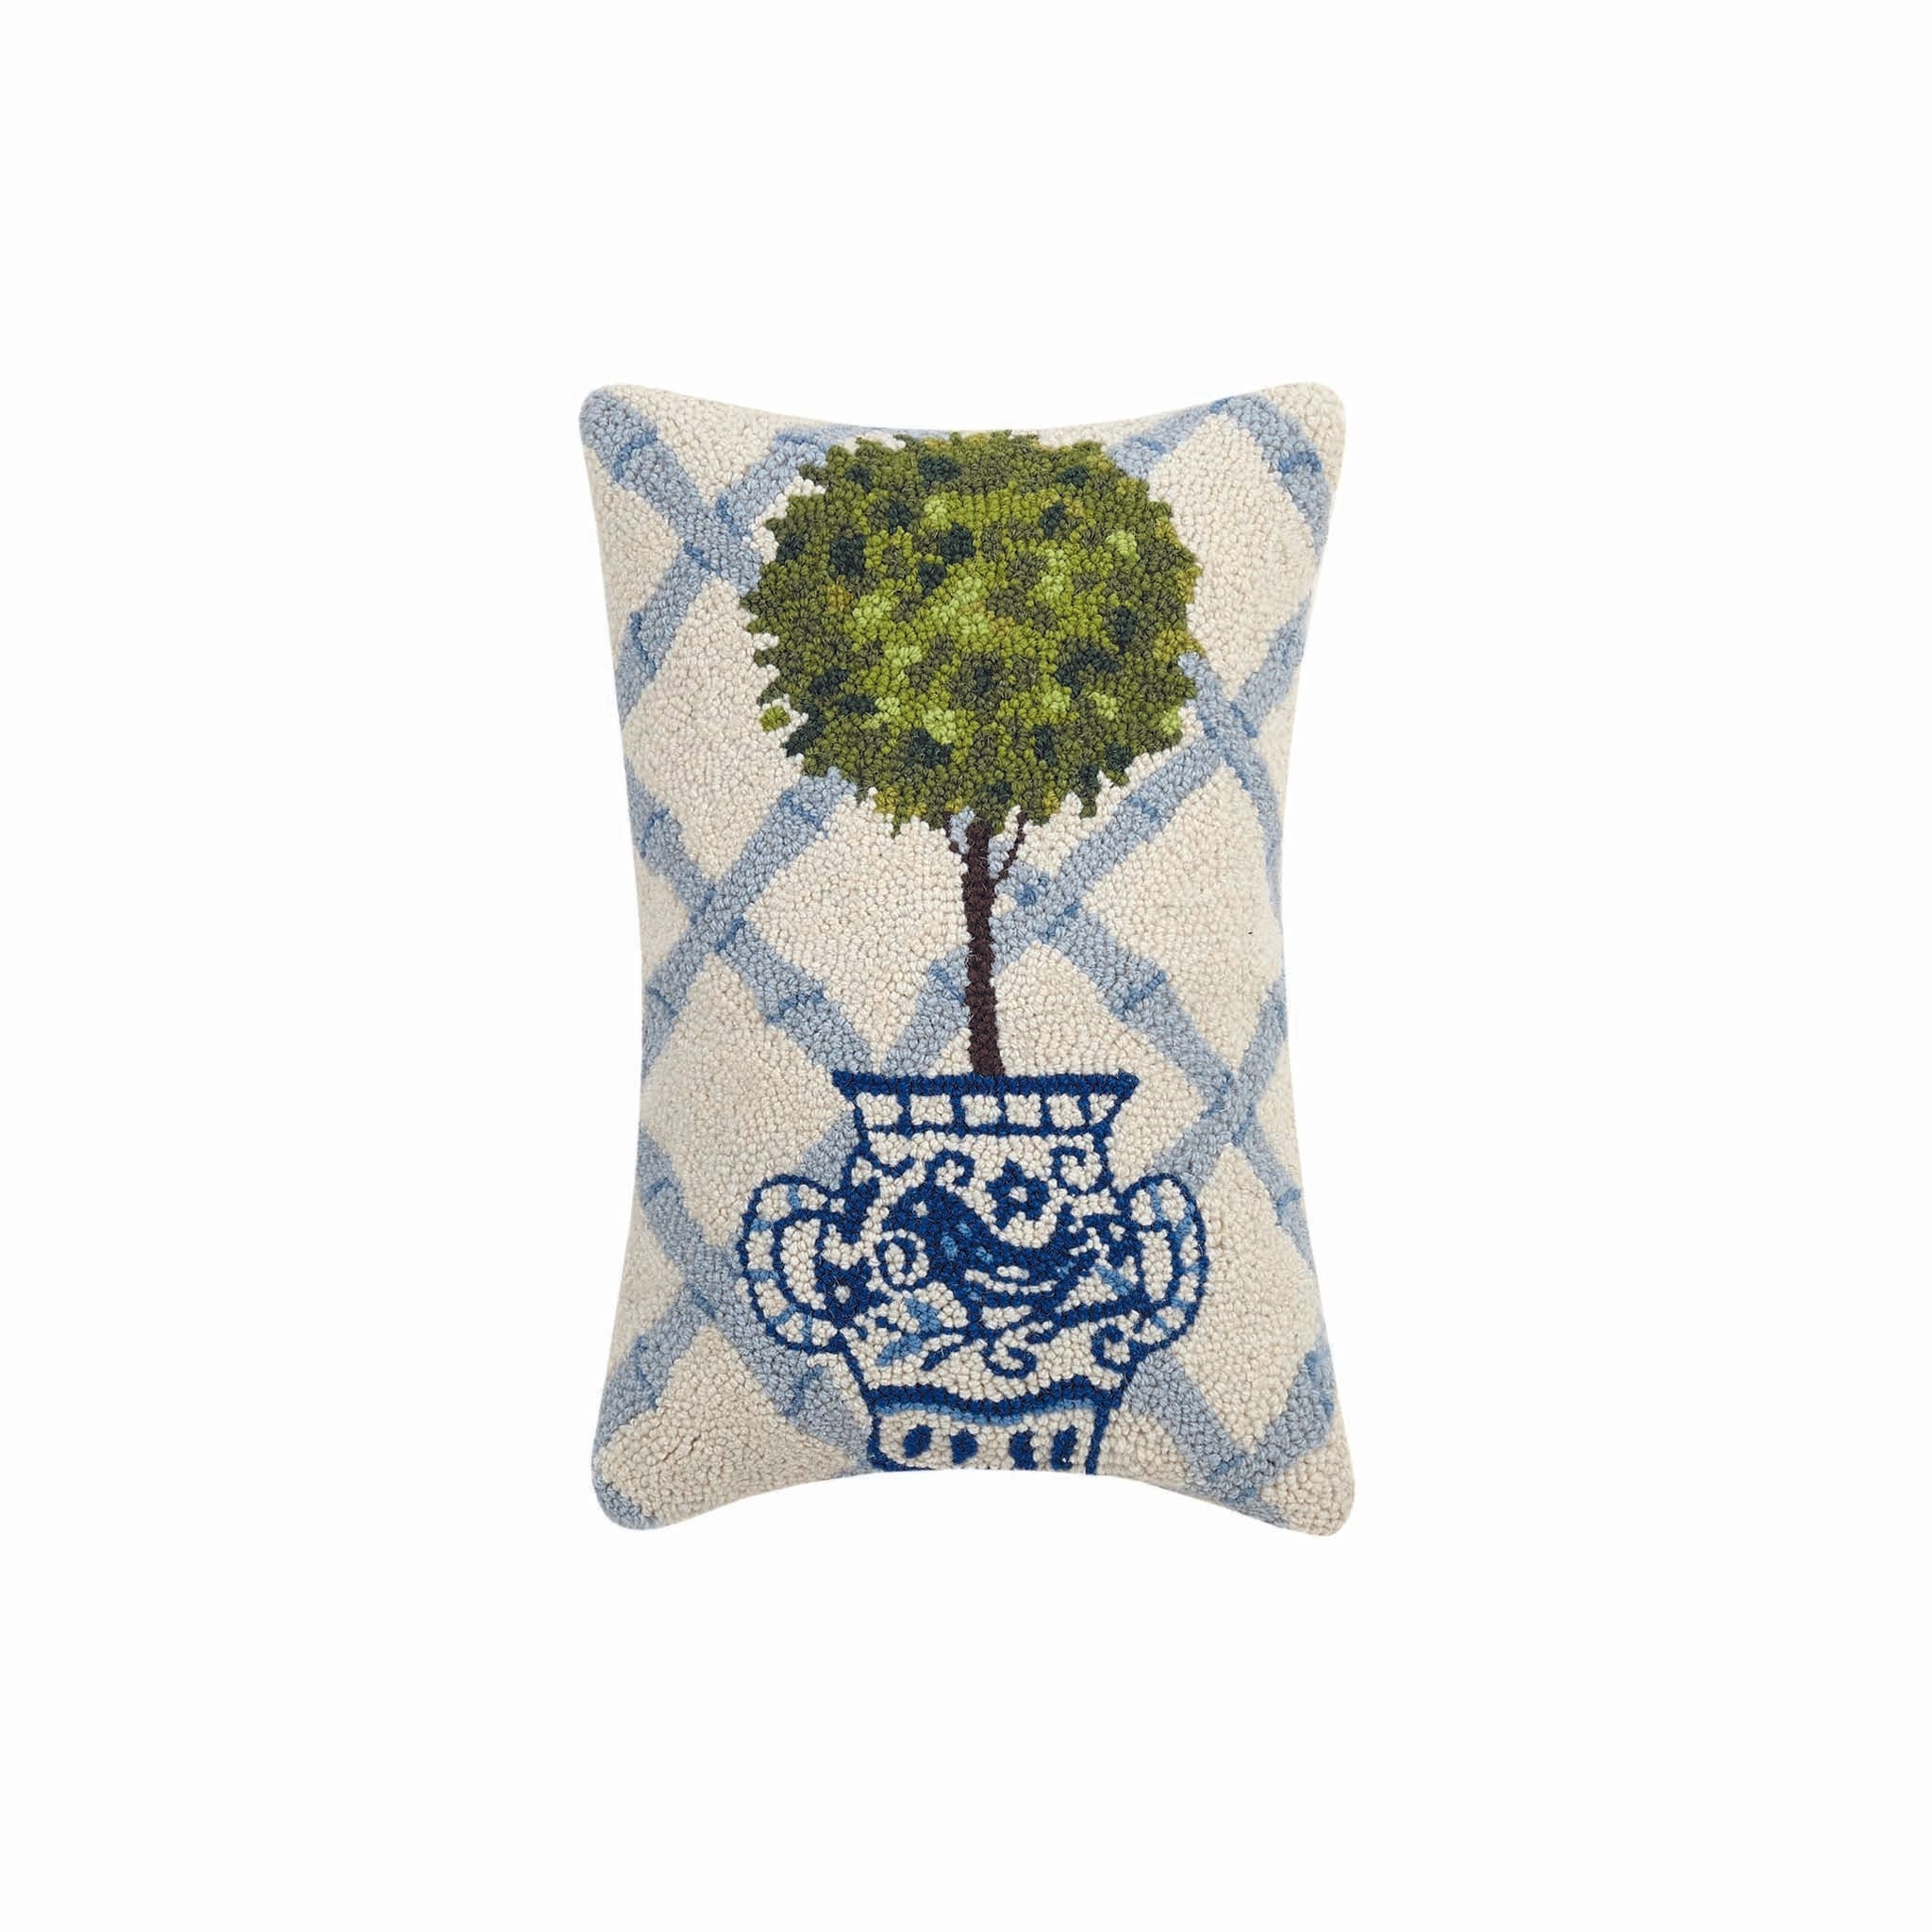 Tall Topiary and Chinoiserie Pot Hooked Pillow